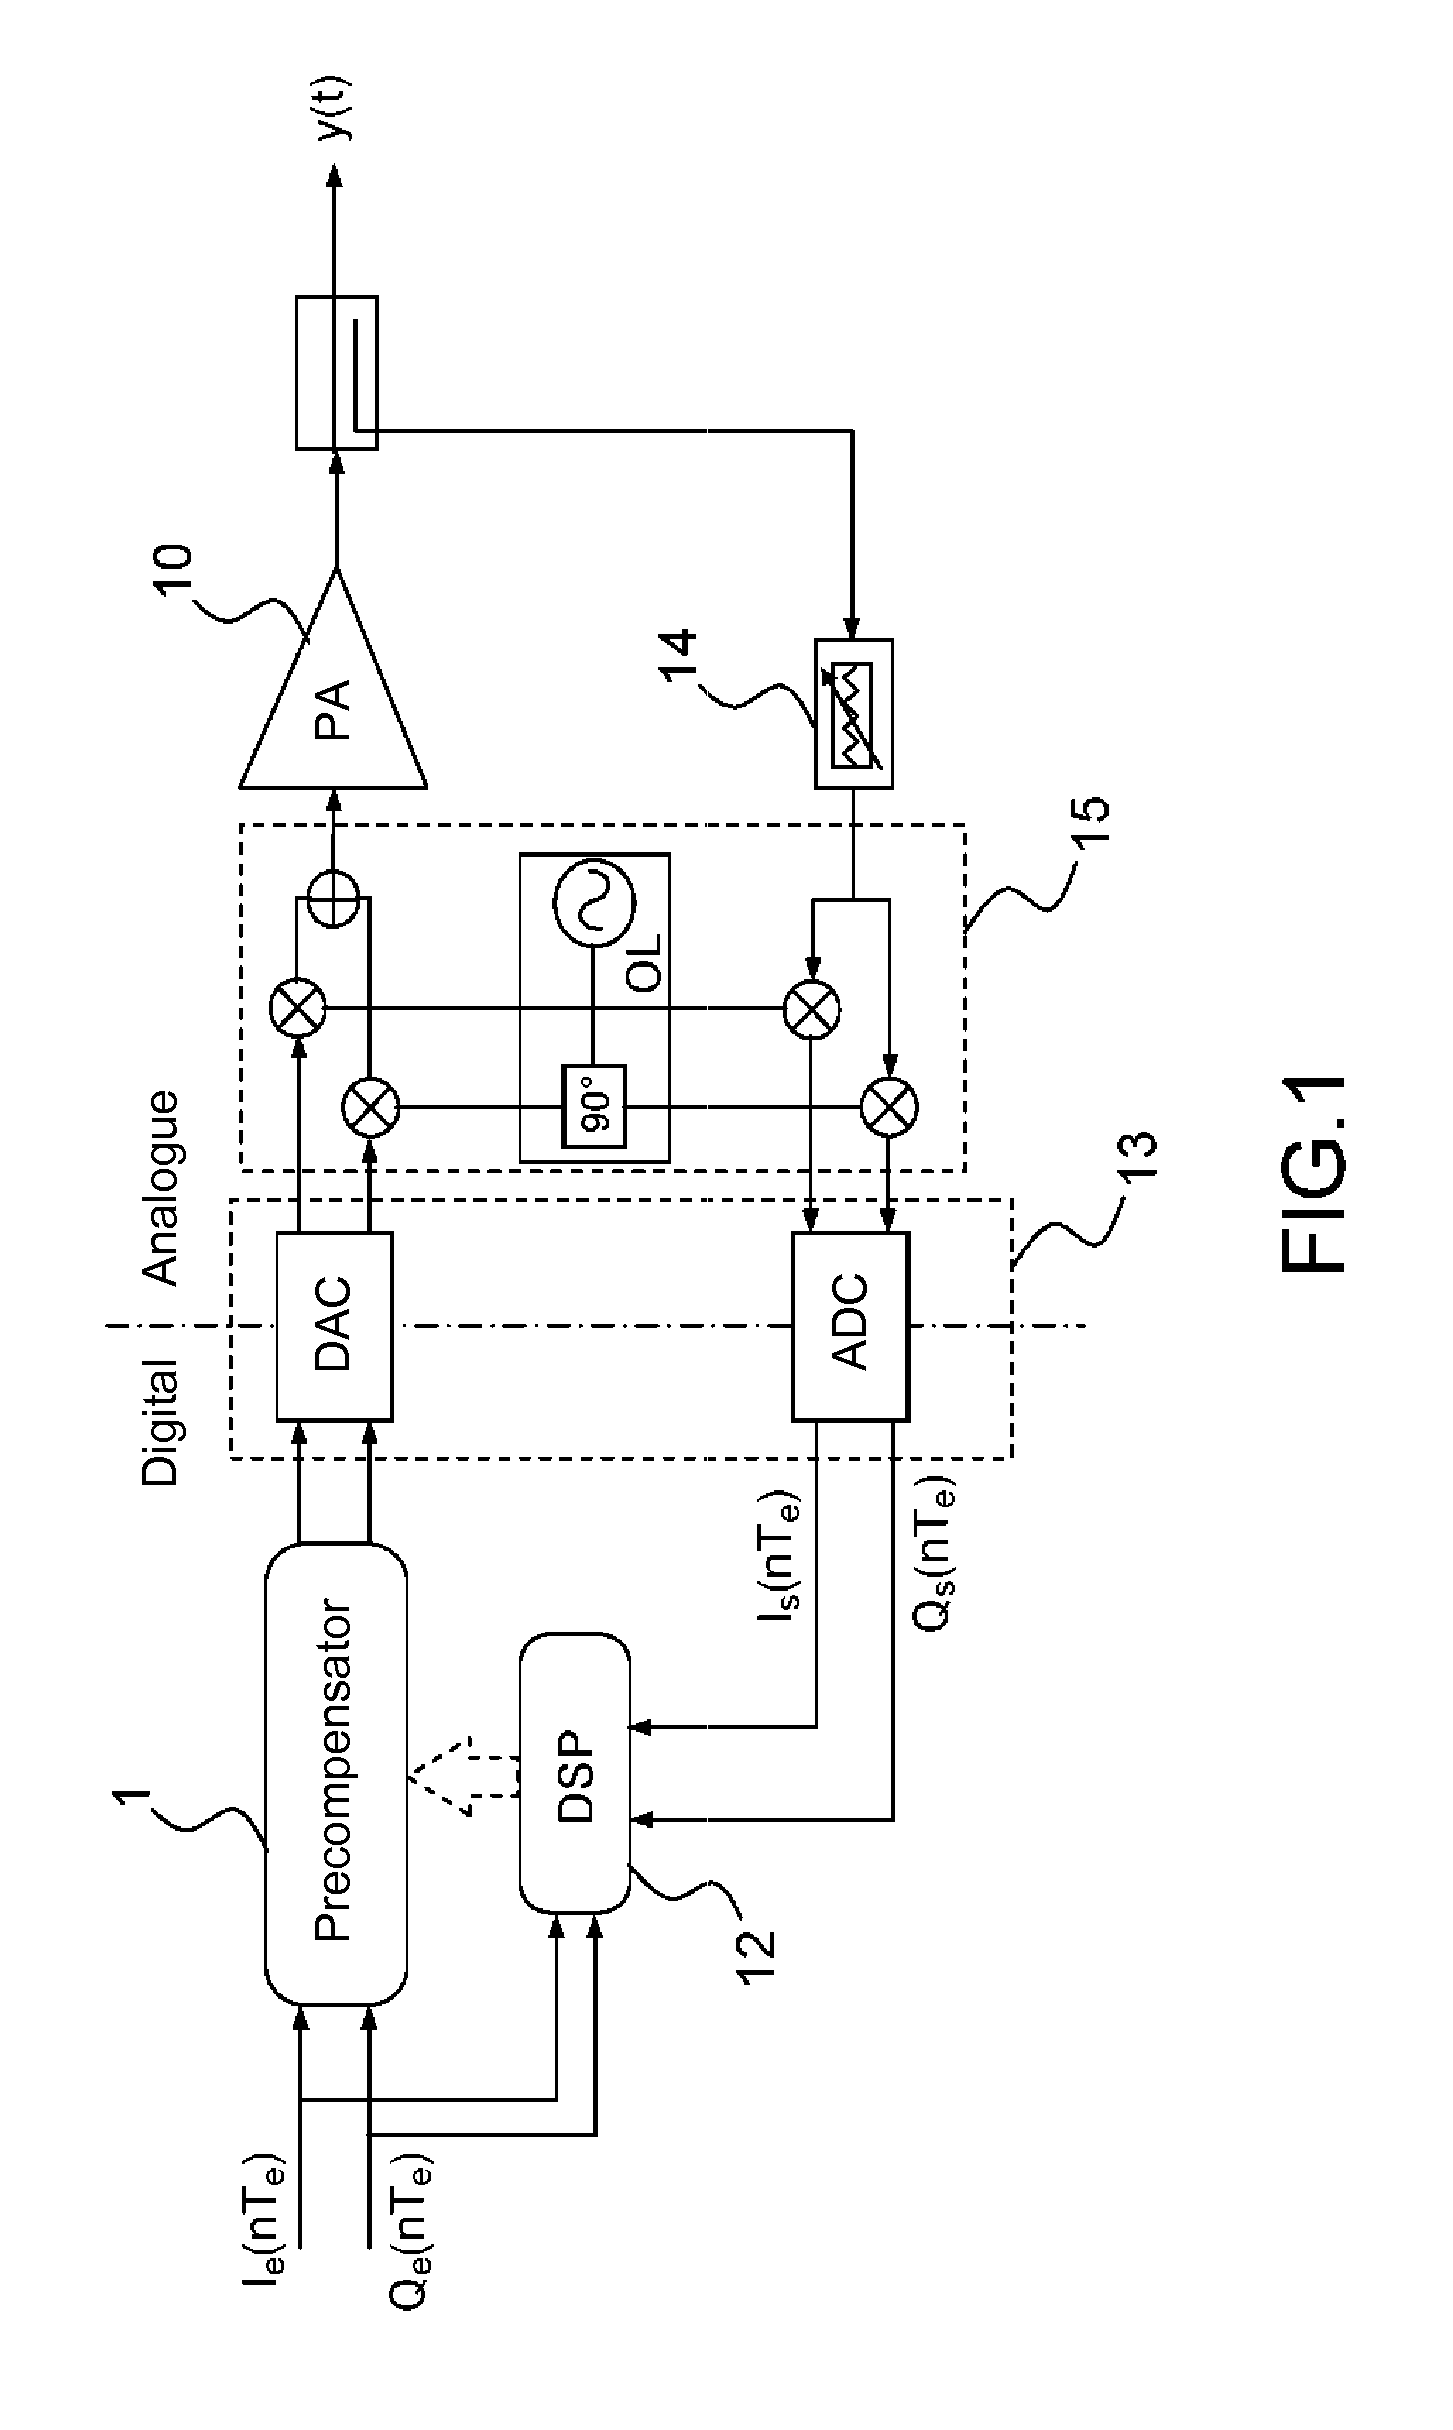 Linearization device for a power amplifier